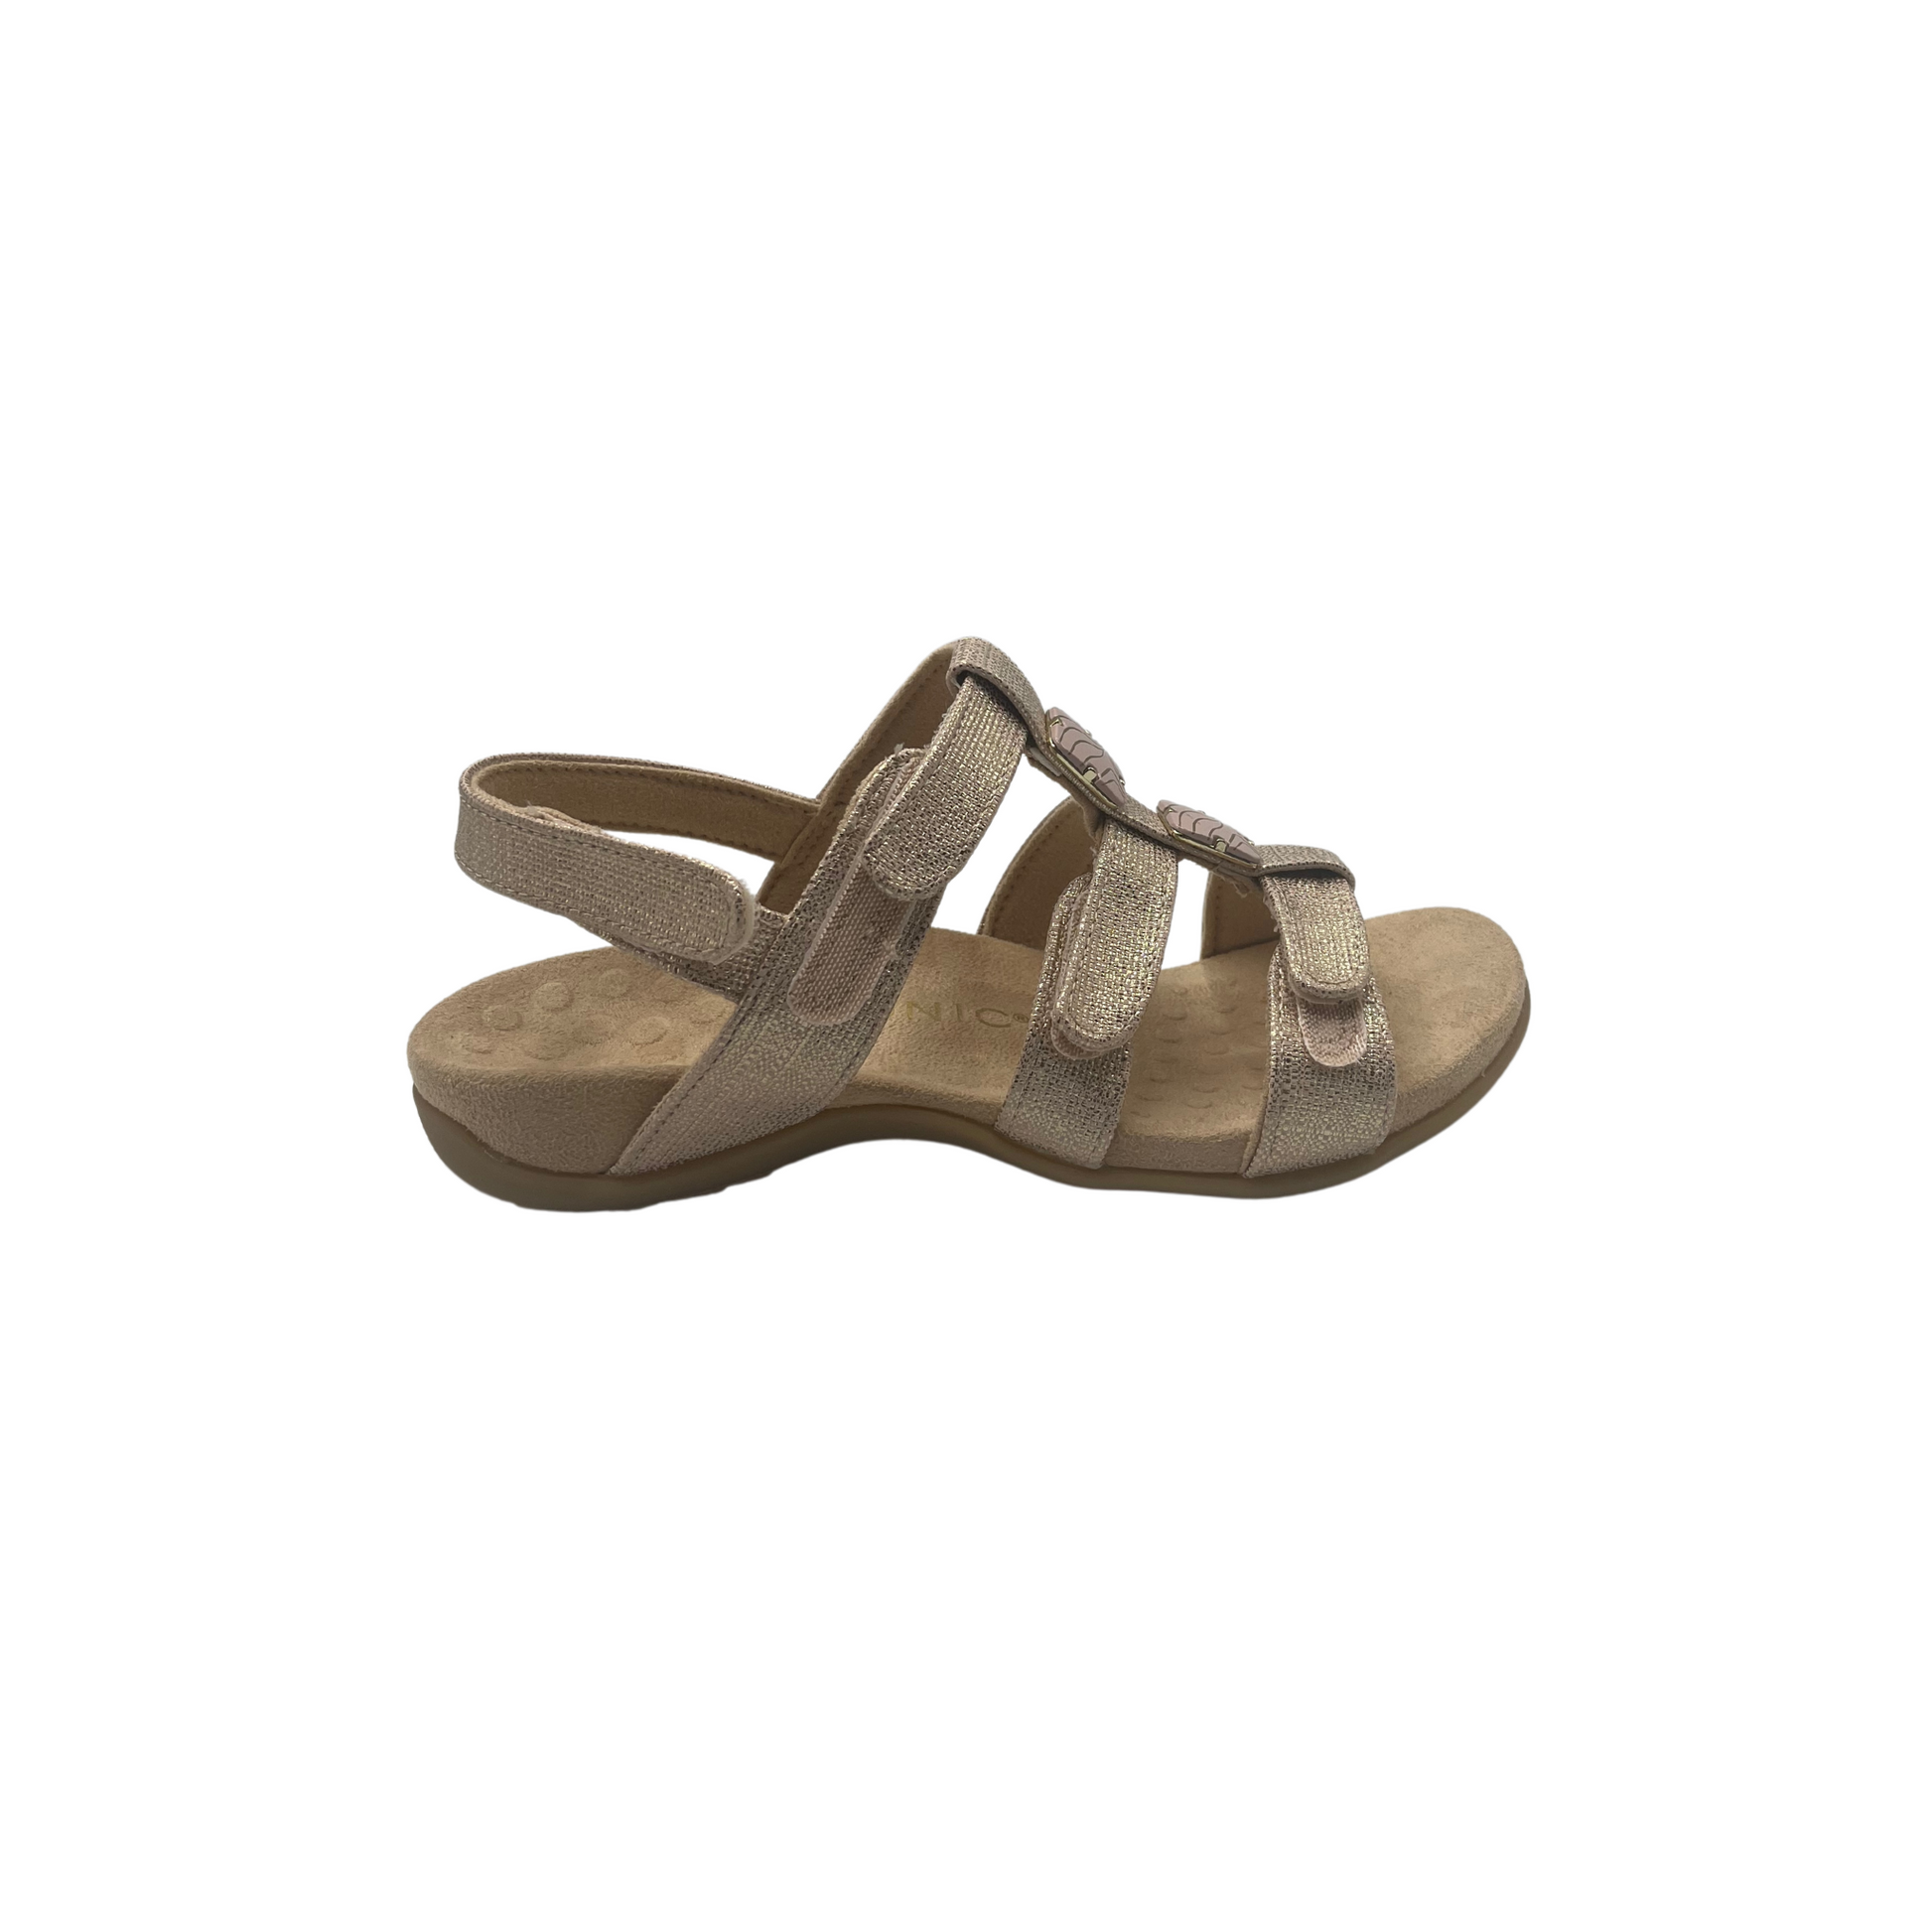 Outside view of sandal in a rose gold.  Multiple, adjustable straps across foot for best fit.  